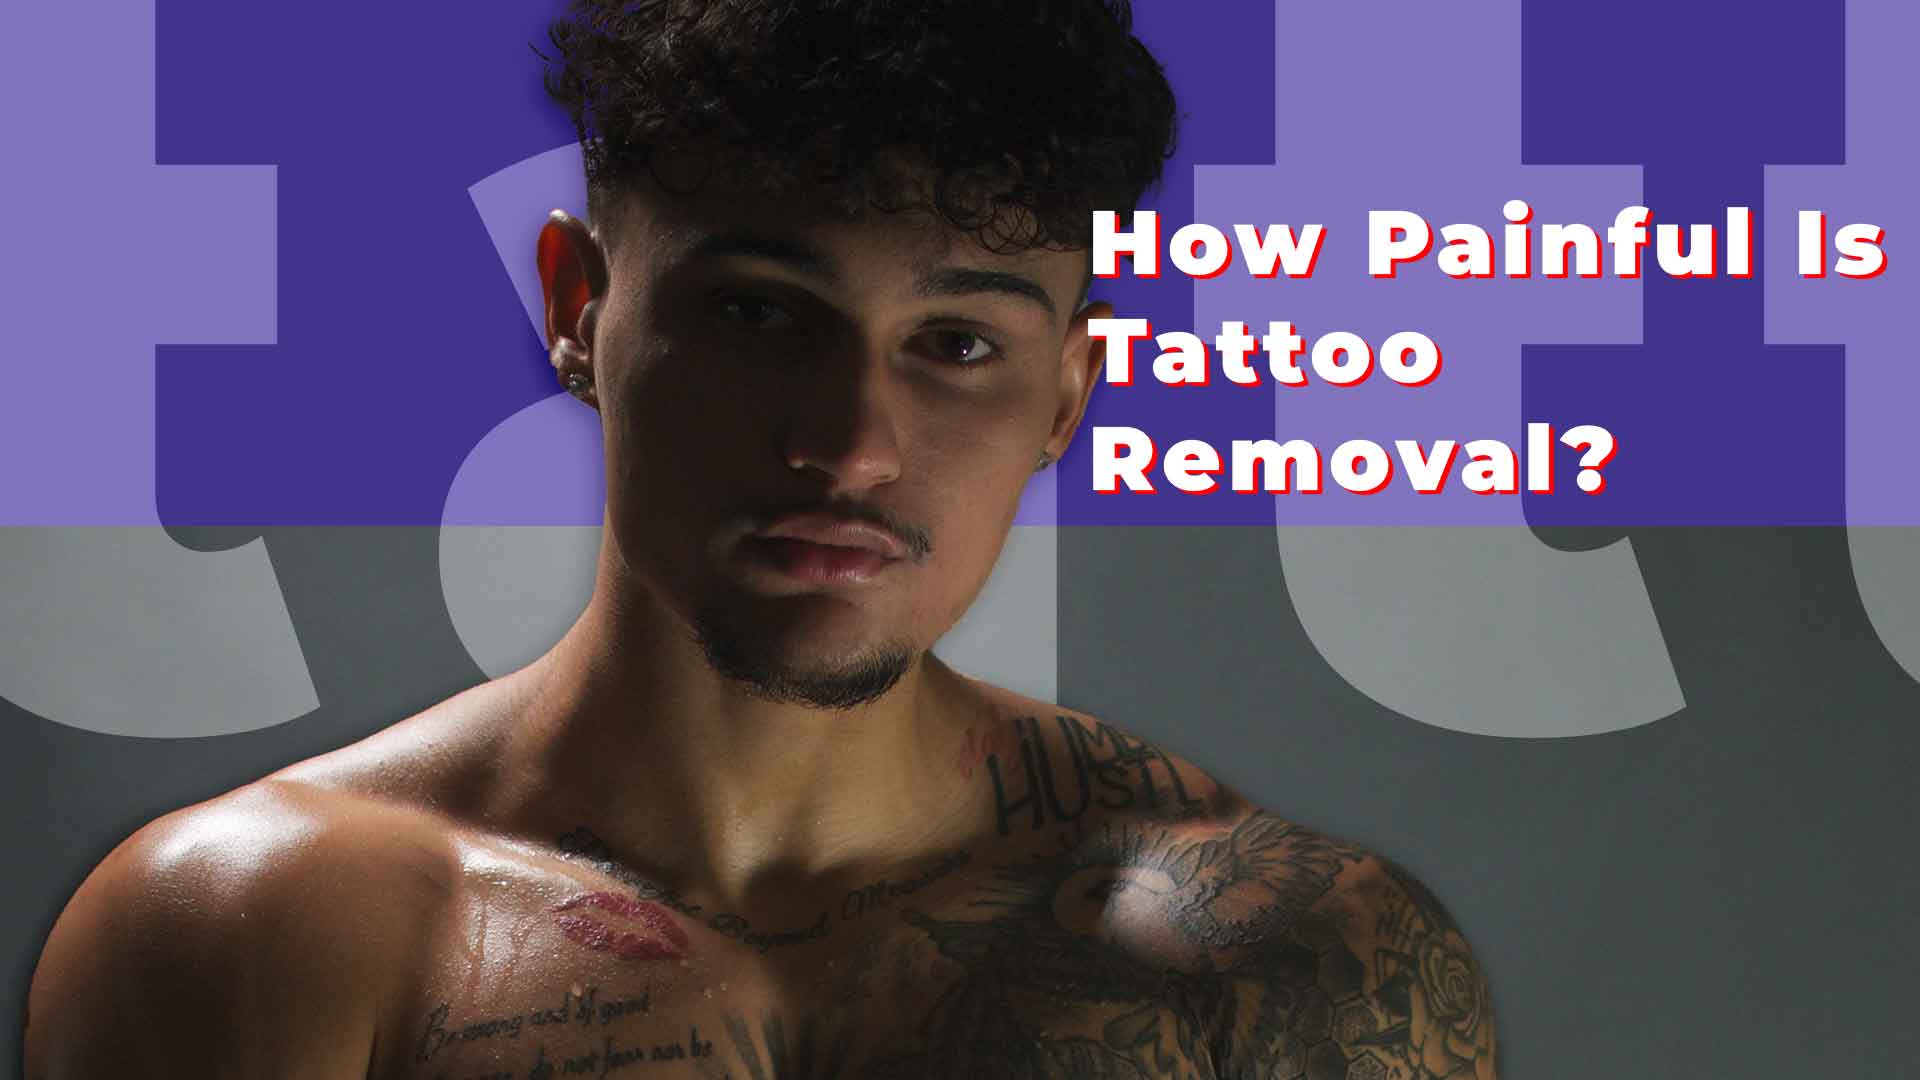 Dermabrasion Treatment for Tattoo Removal | Care Well Medical Centre